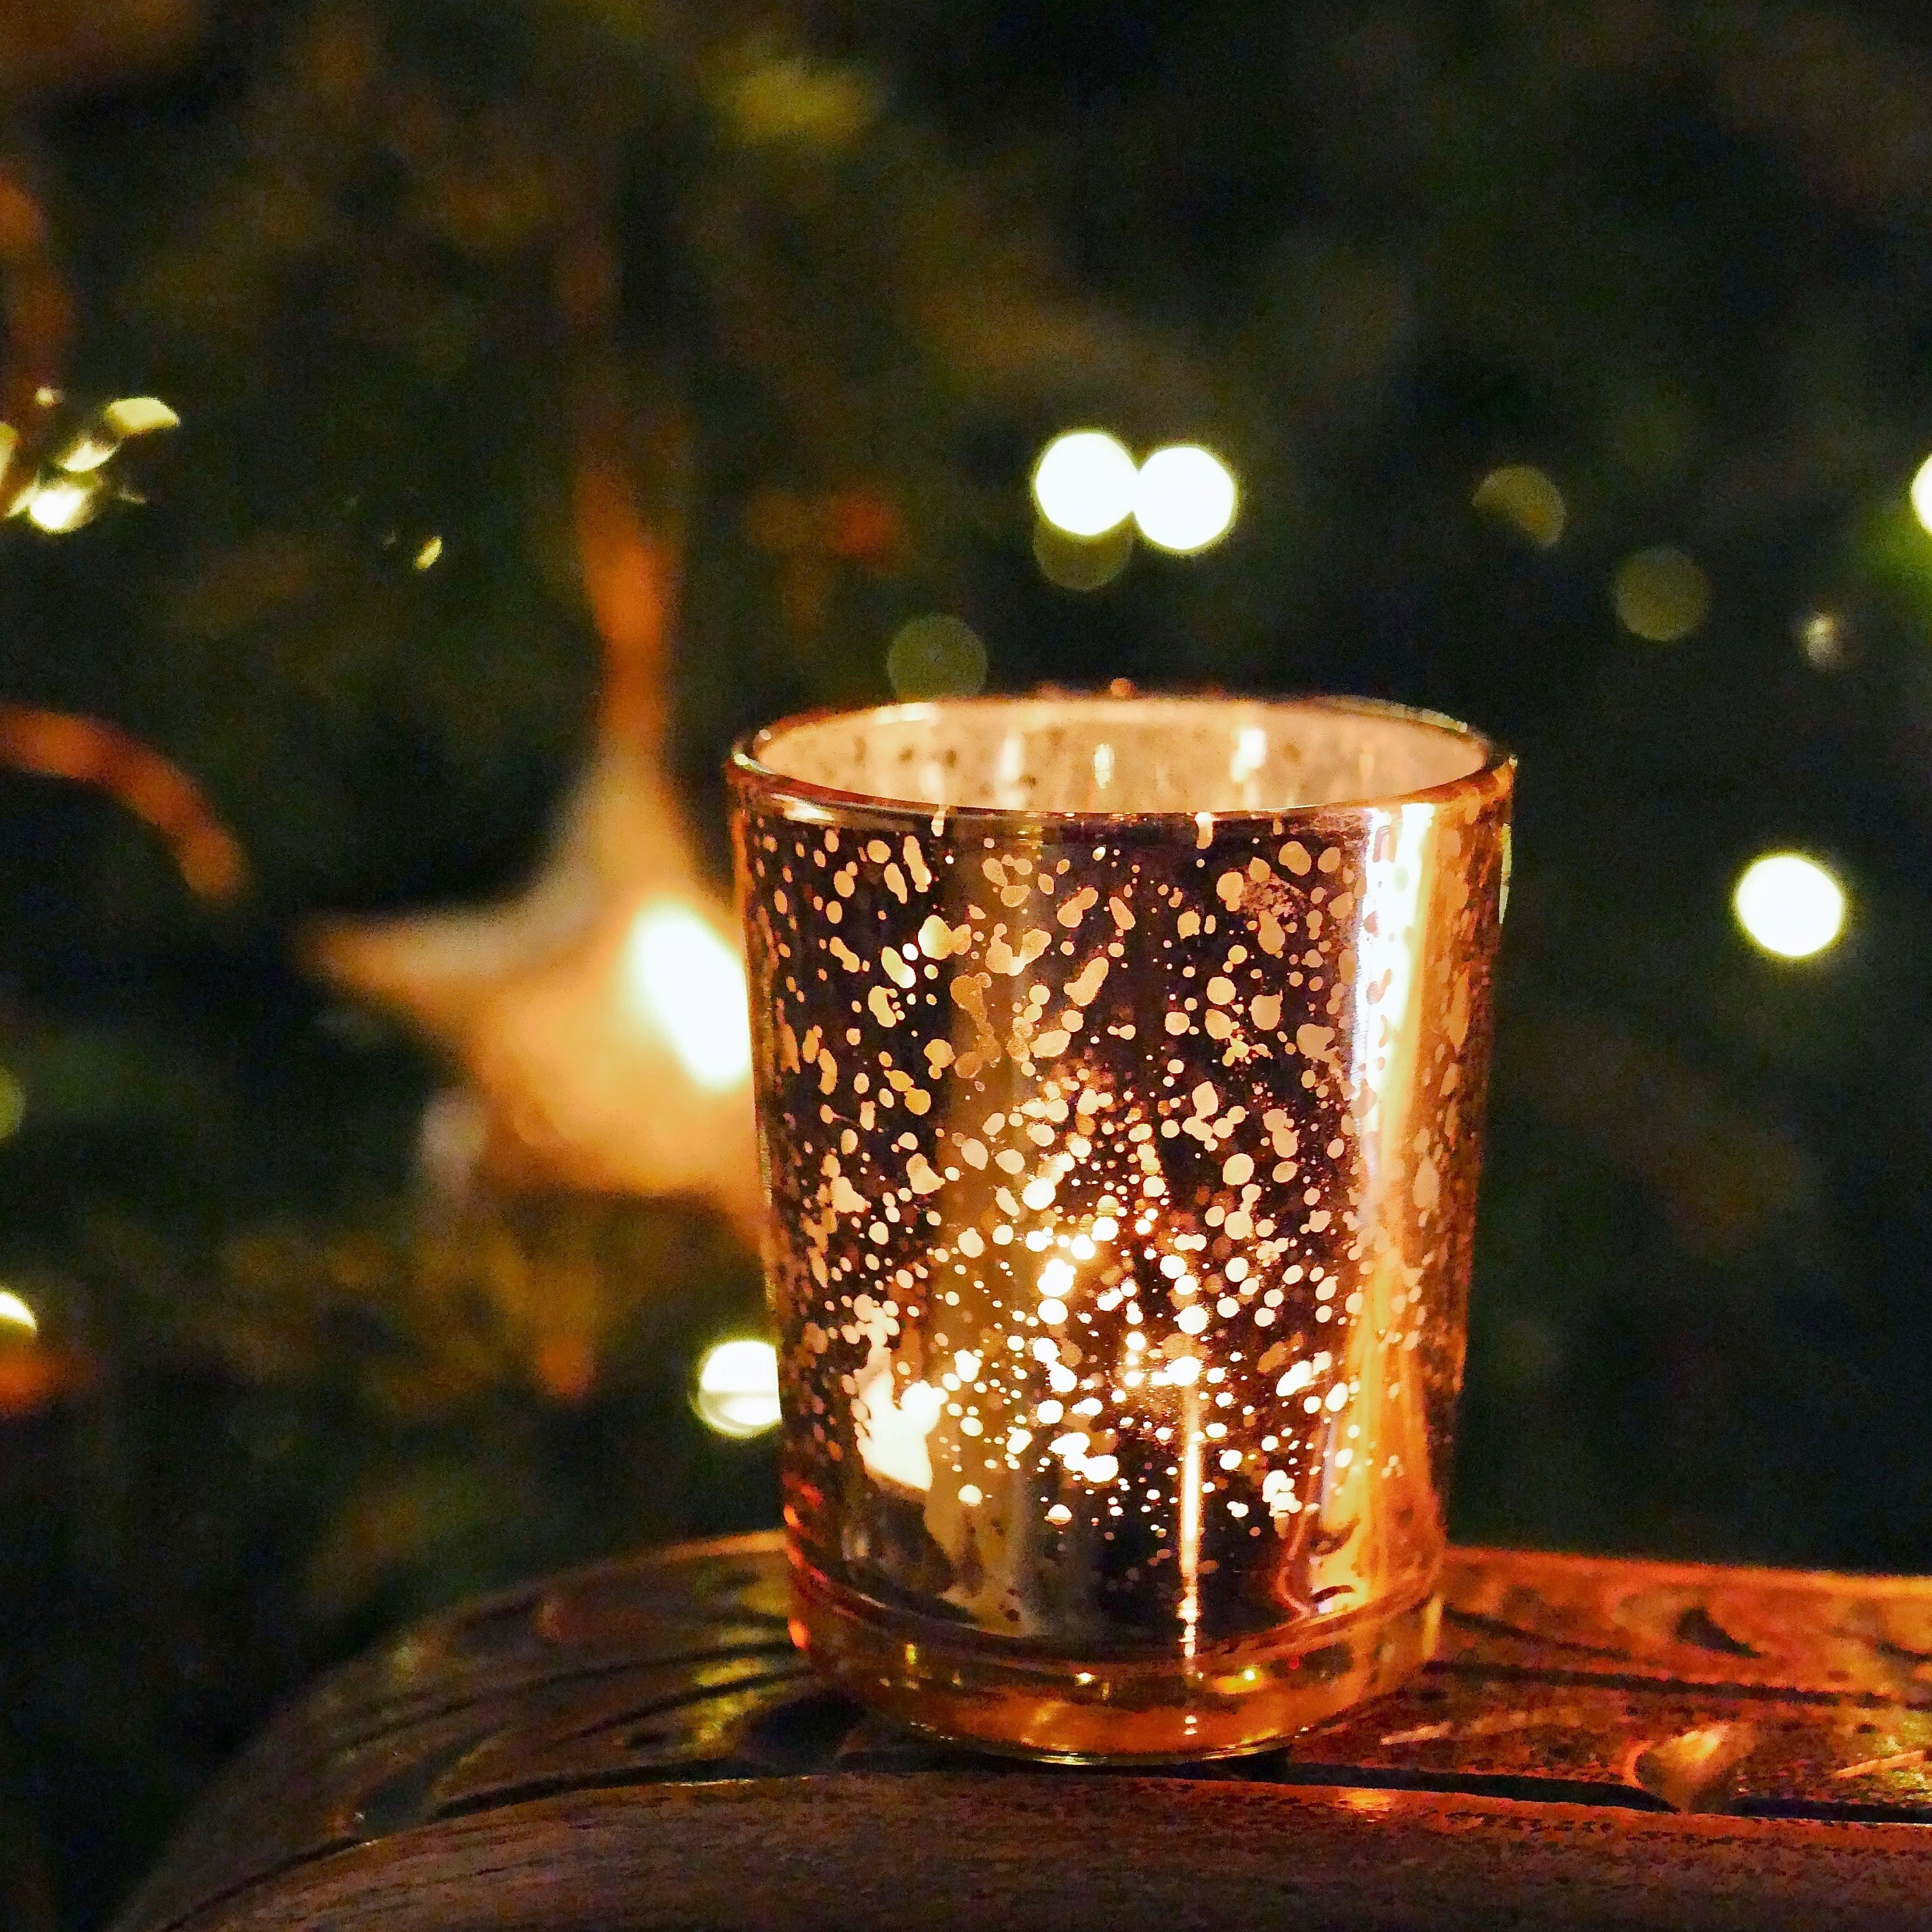 Rose-gold tealight holder votive in front of Christmas tree